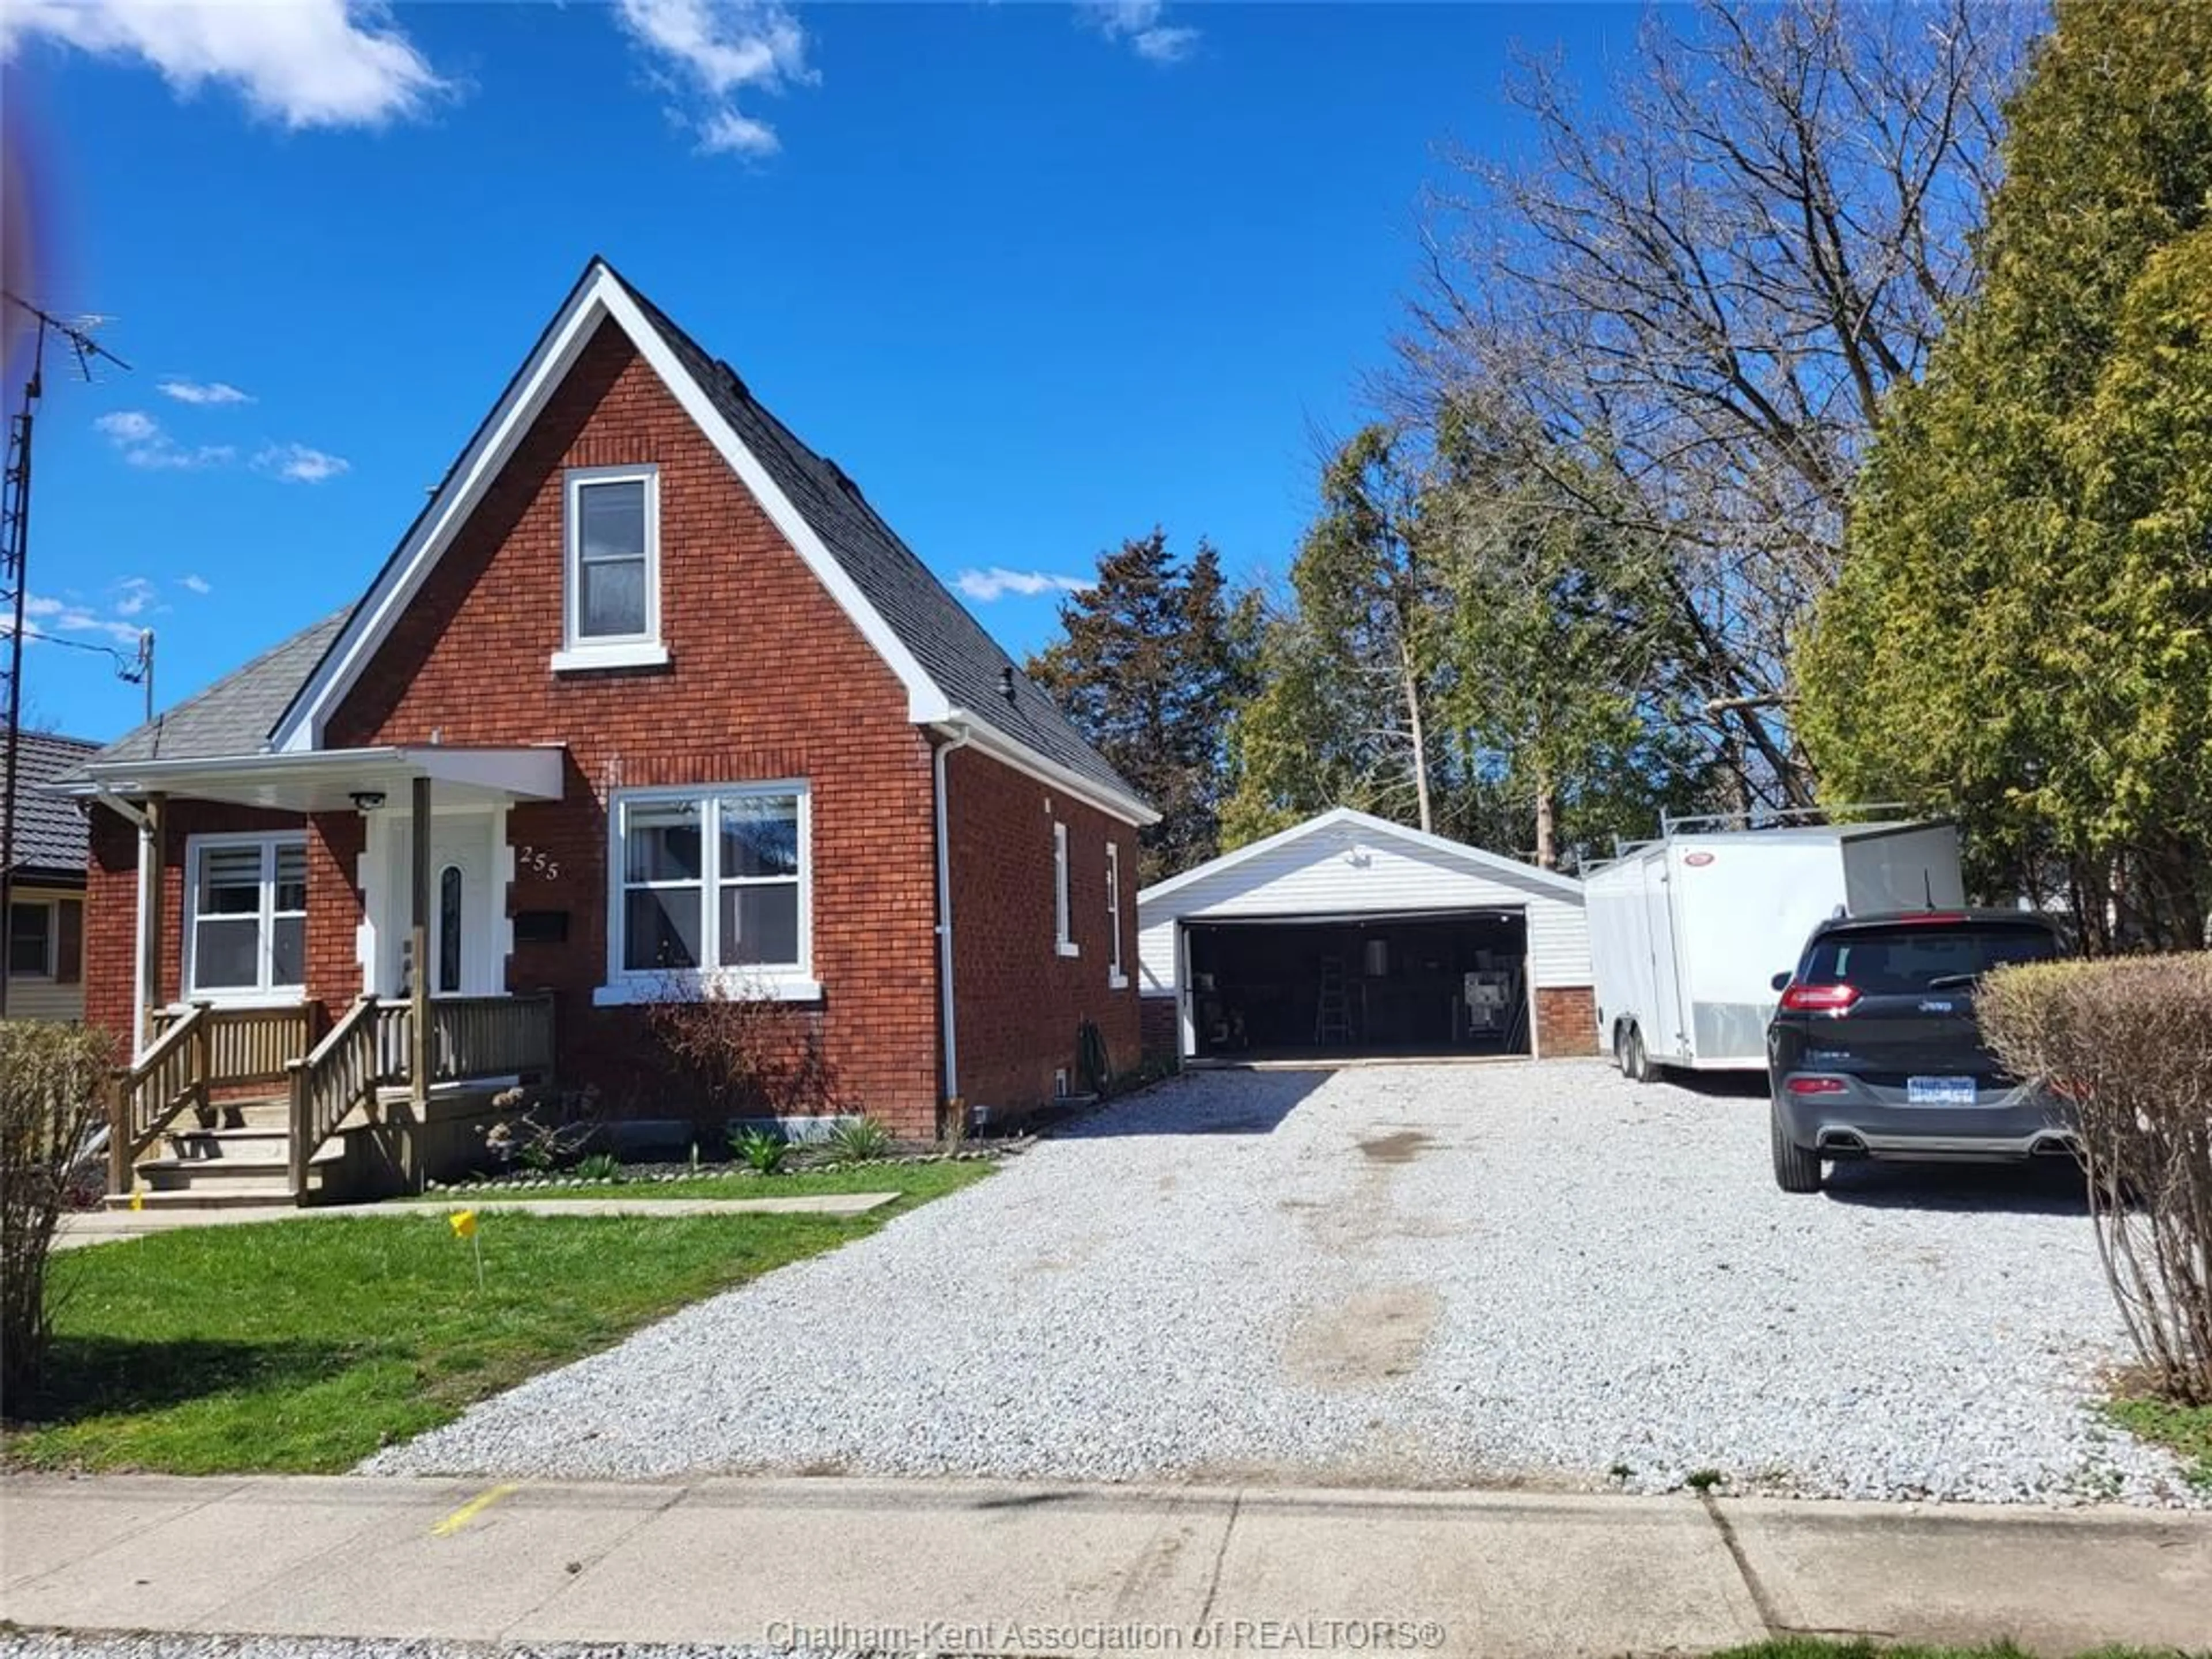 Home with brick exterior material for 255 Selkirk St, Chatham Ontario N7L 1Z5